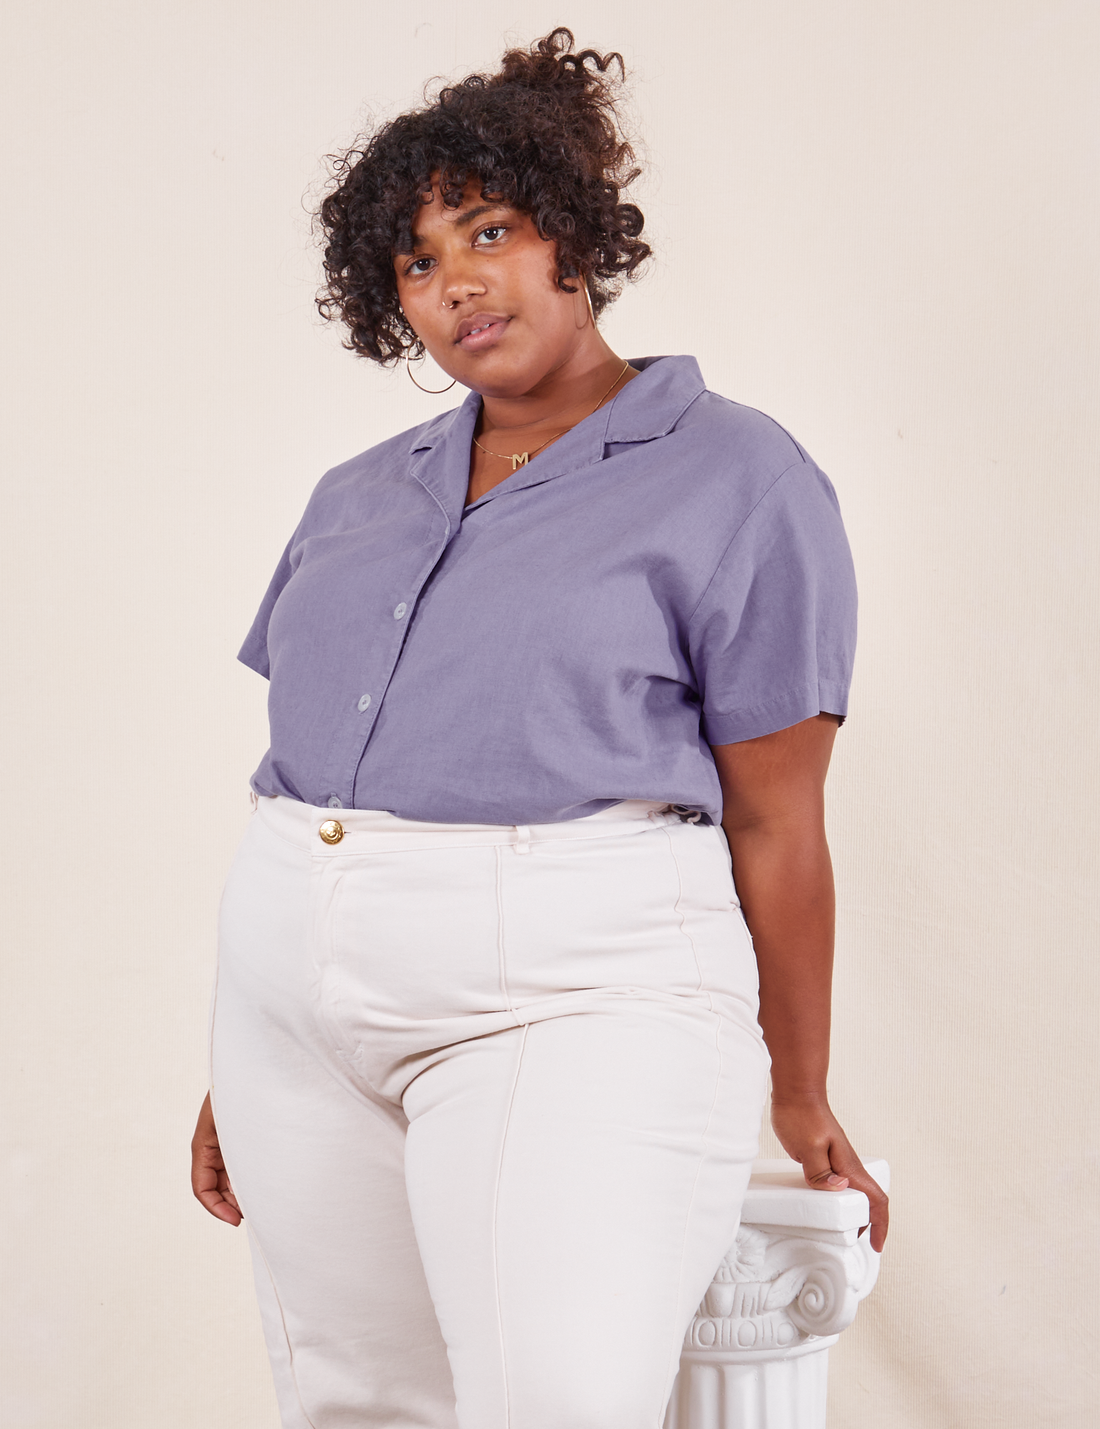 Pantry Button-Up in Faded Grape on Morgan wearing vintage off-white Western Pants